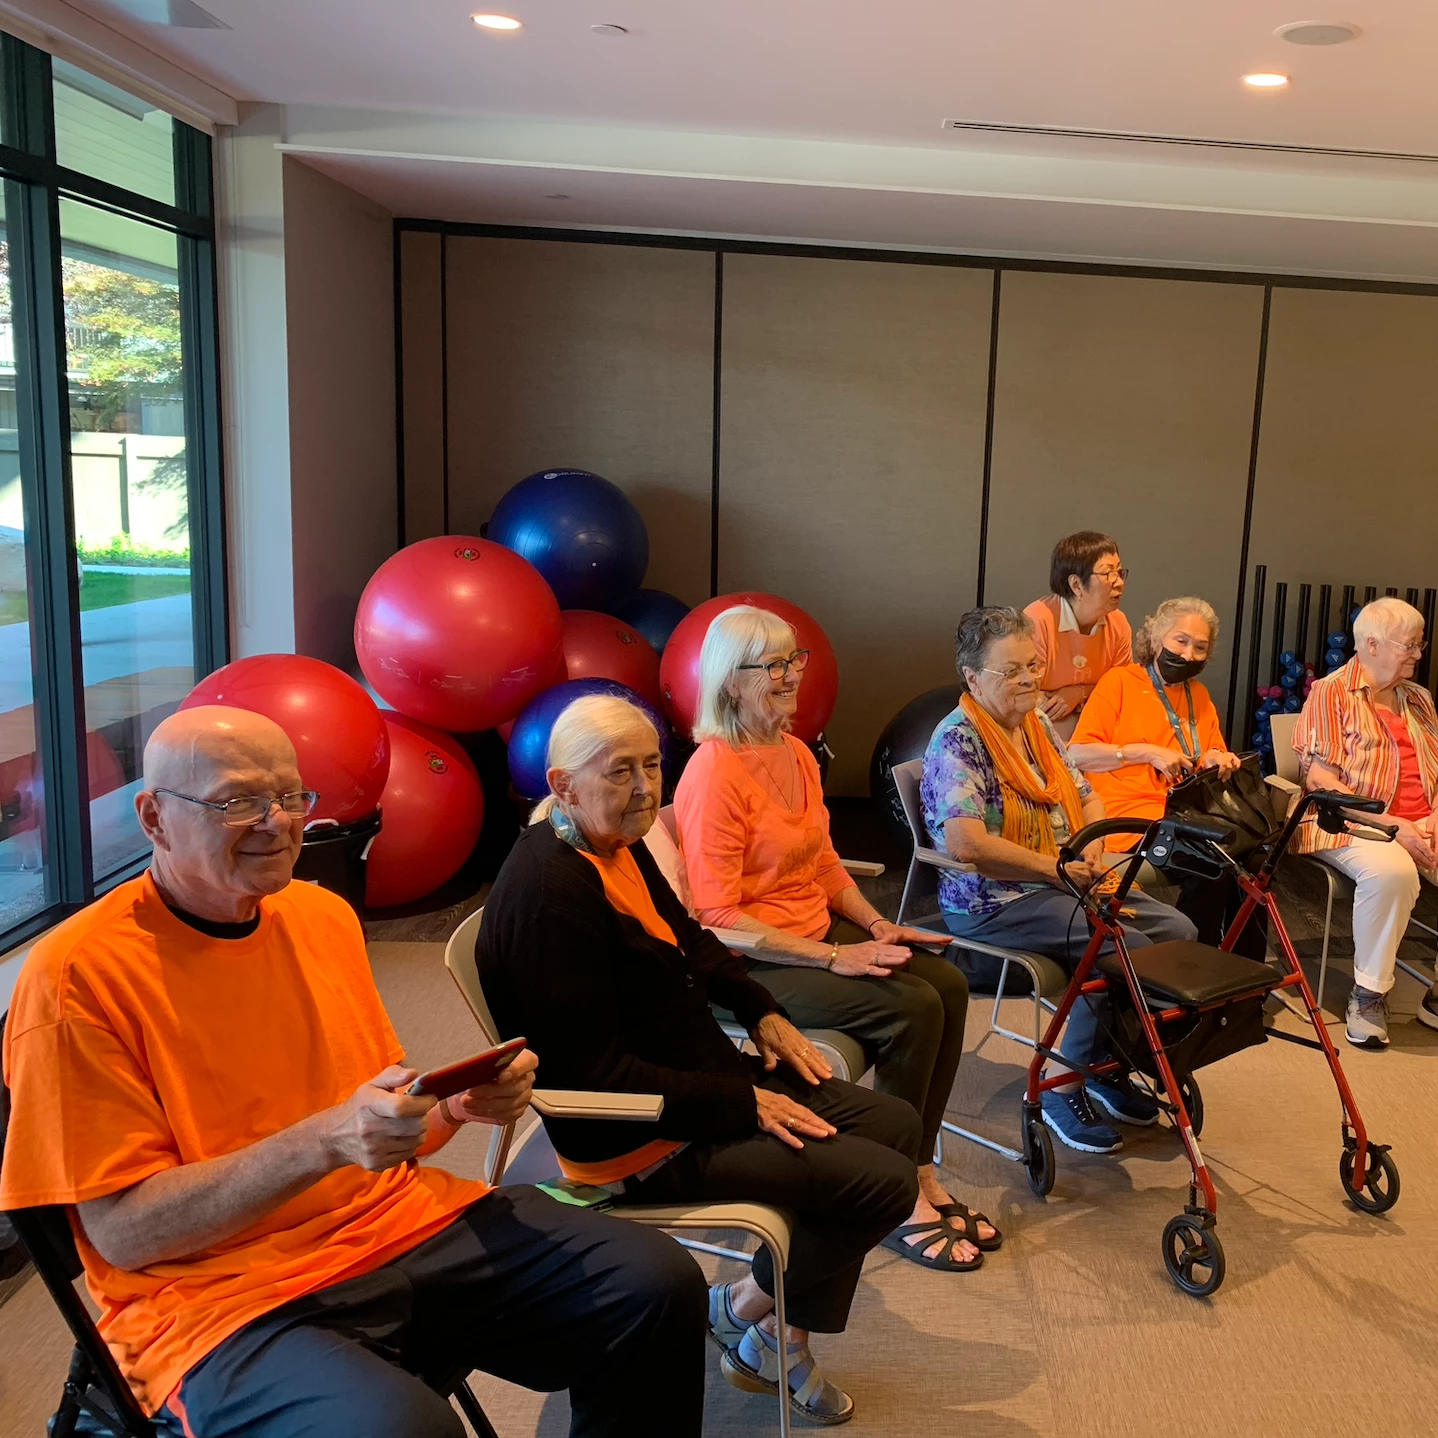 Residents of a senior home in orange attire all seated together.